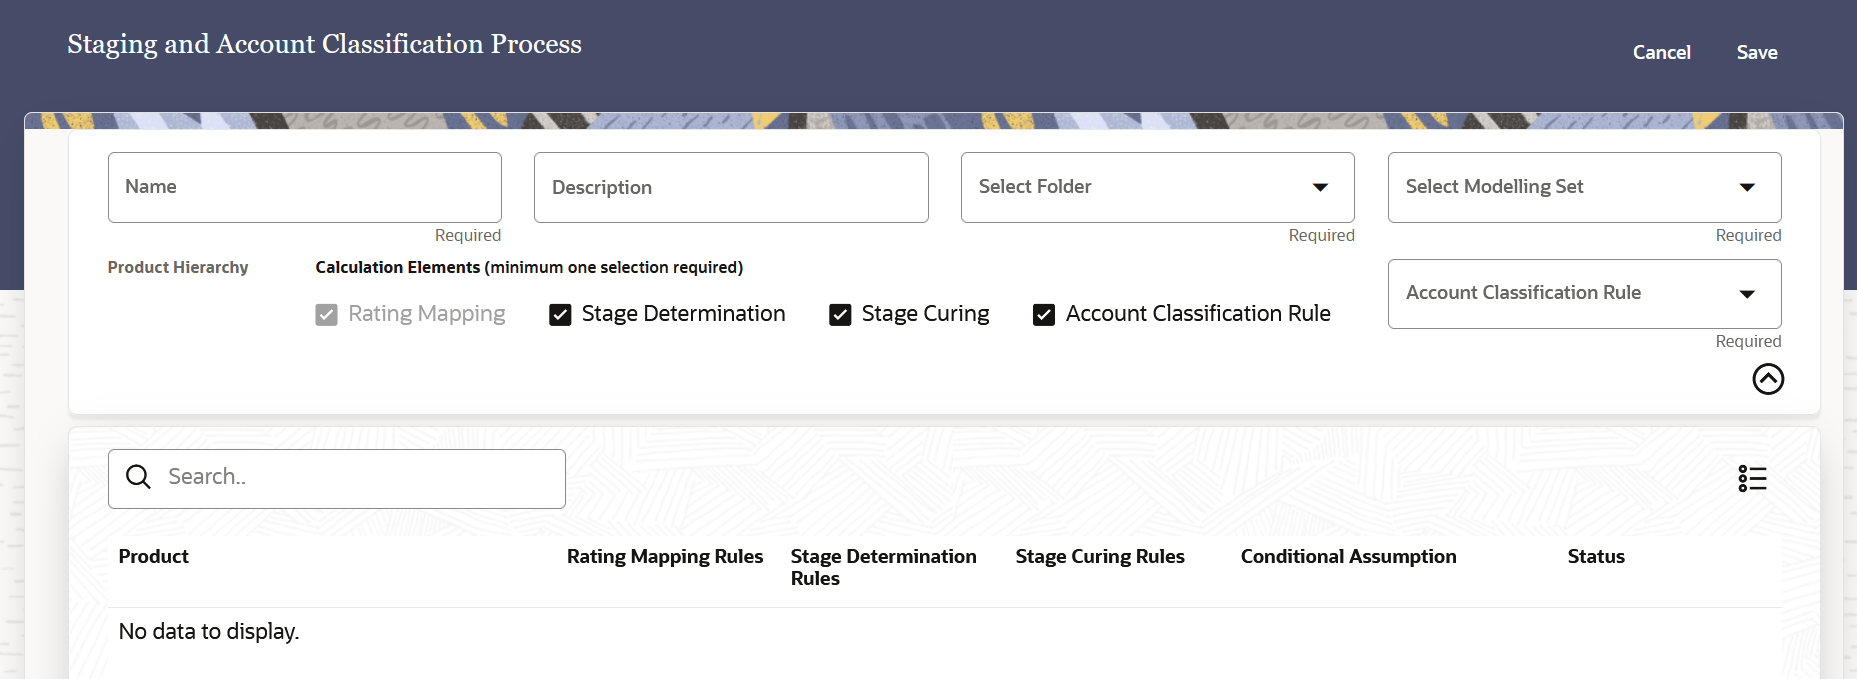 The Staging and Account Classification Process Creation Page